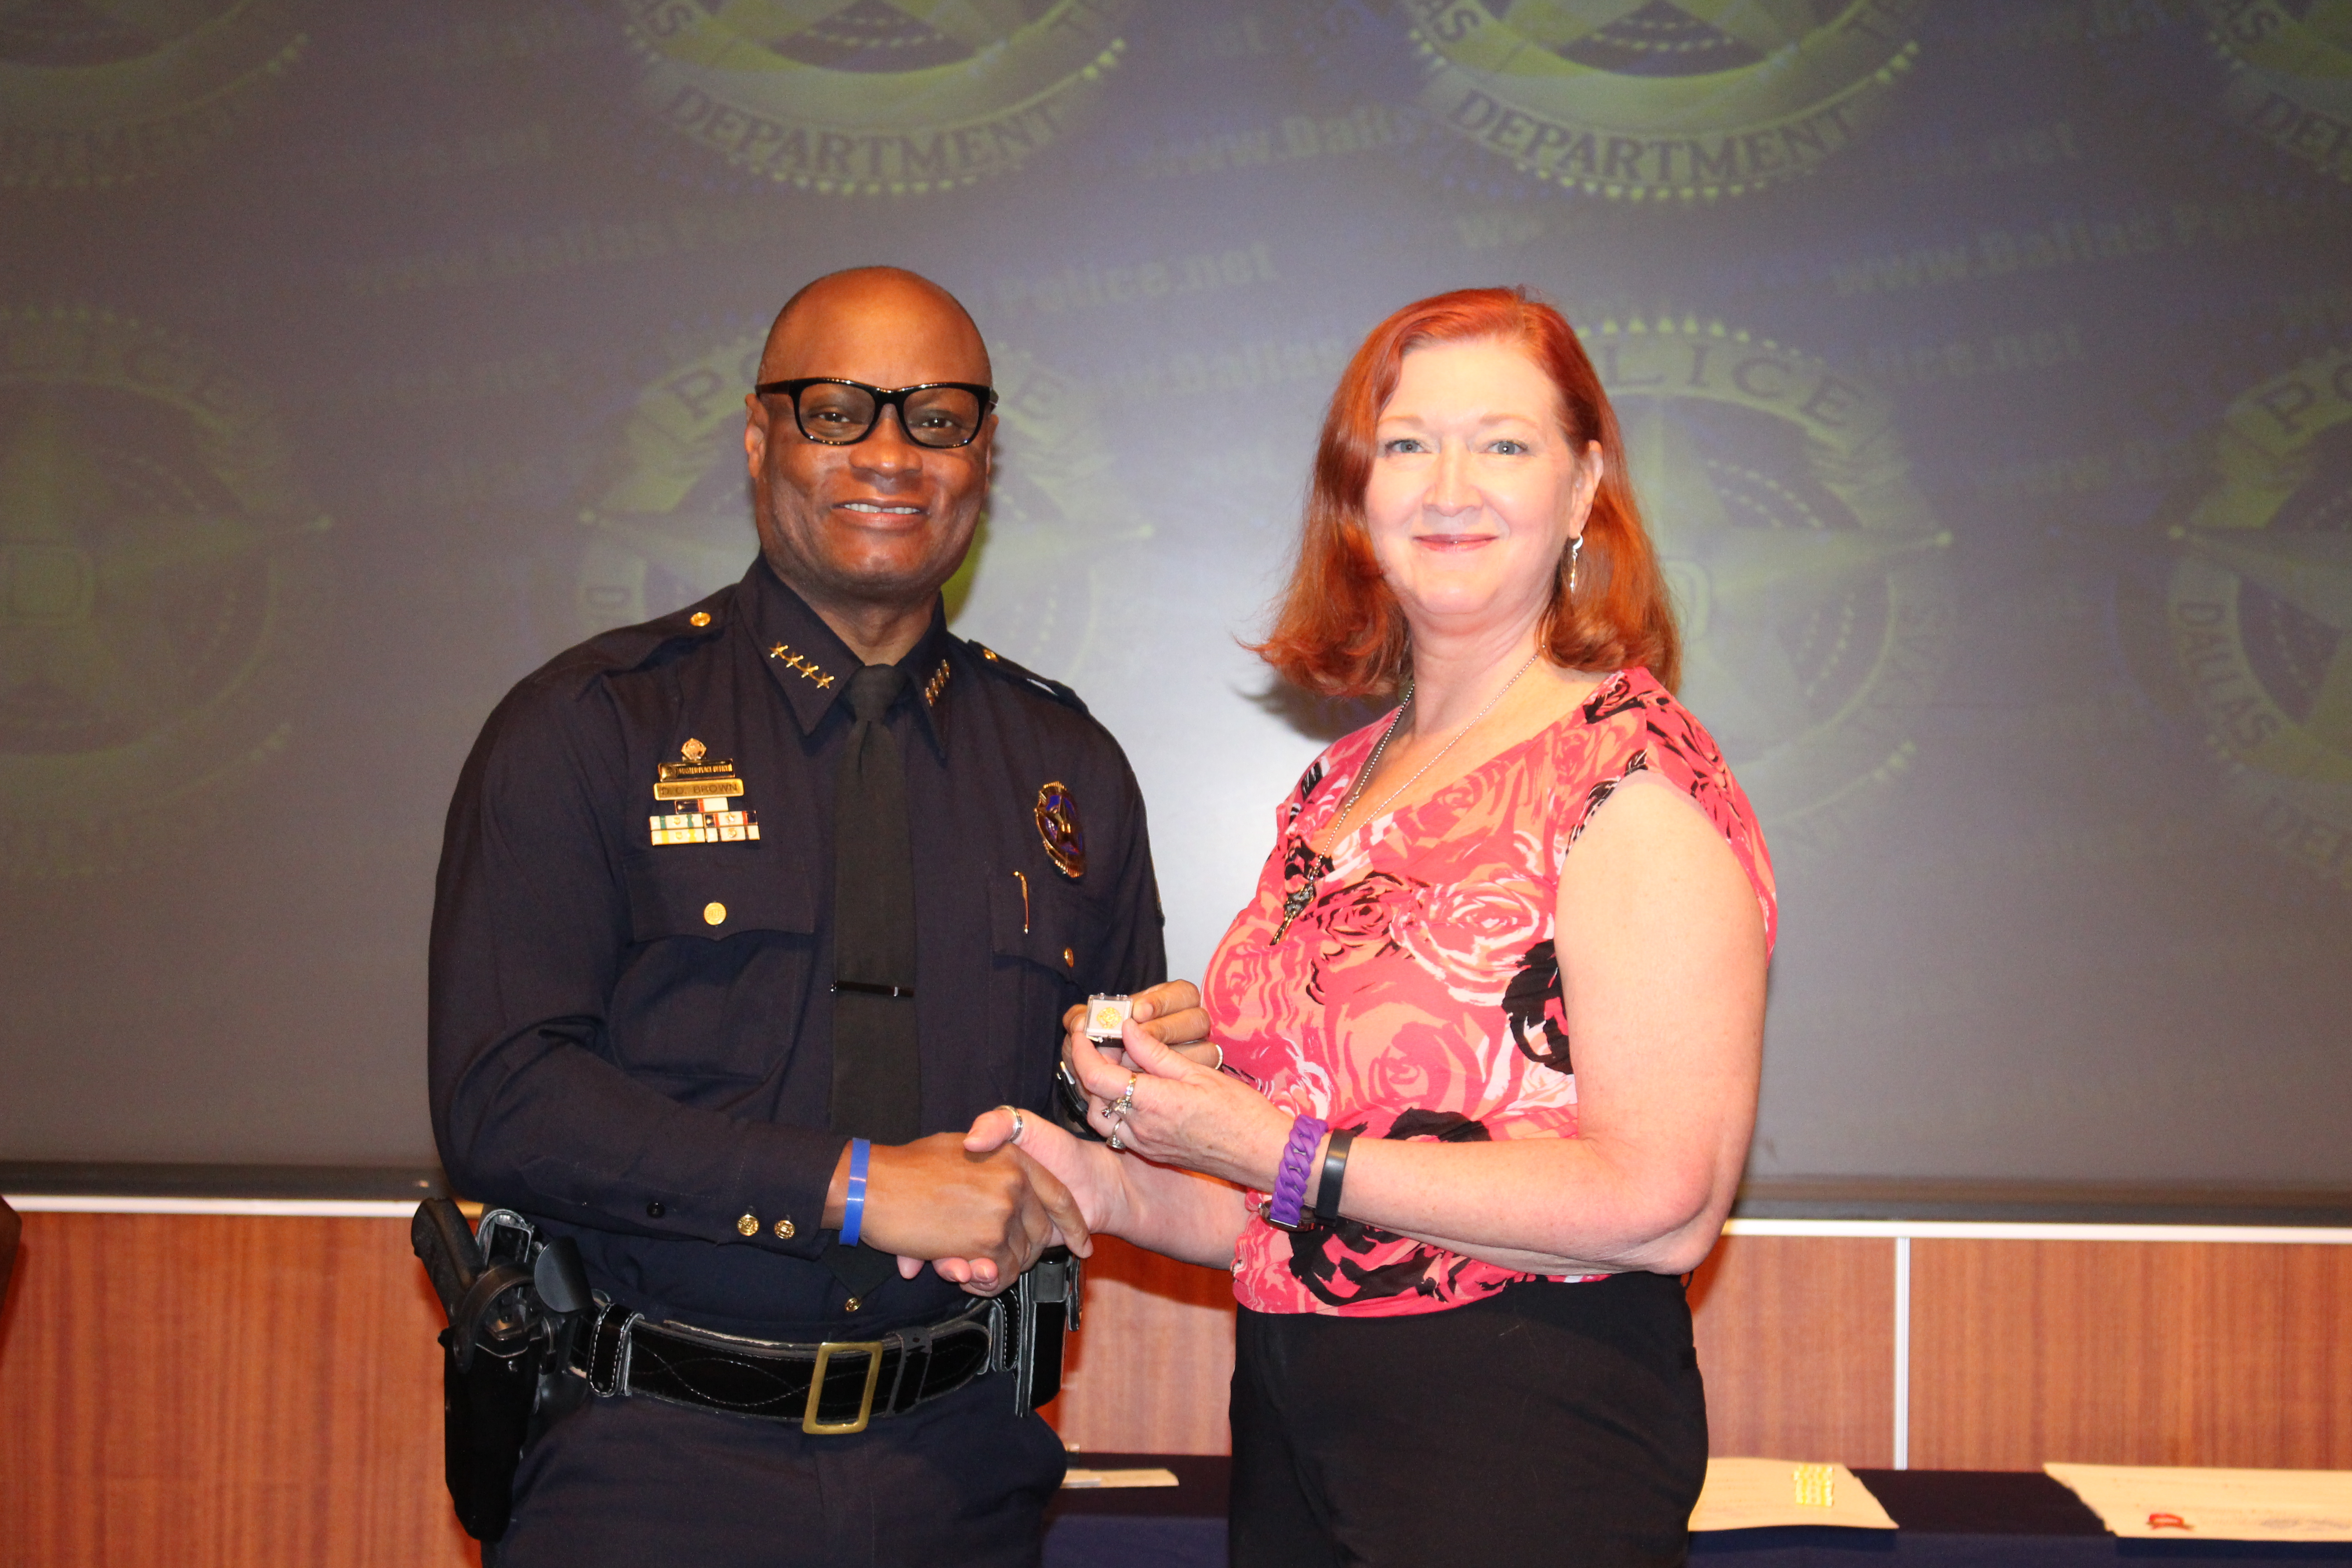 Dallas Police Department Awards Ceremony | DPD Beat